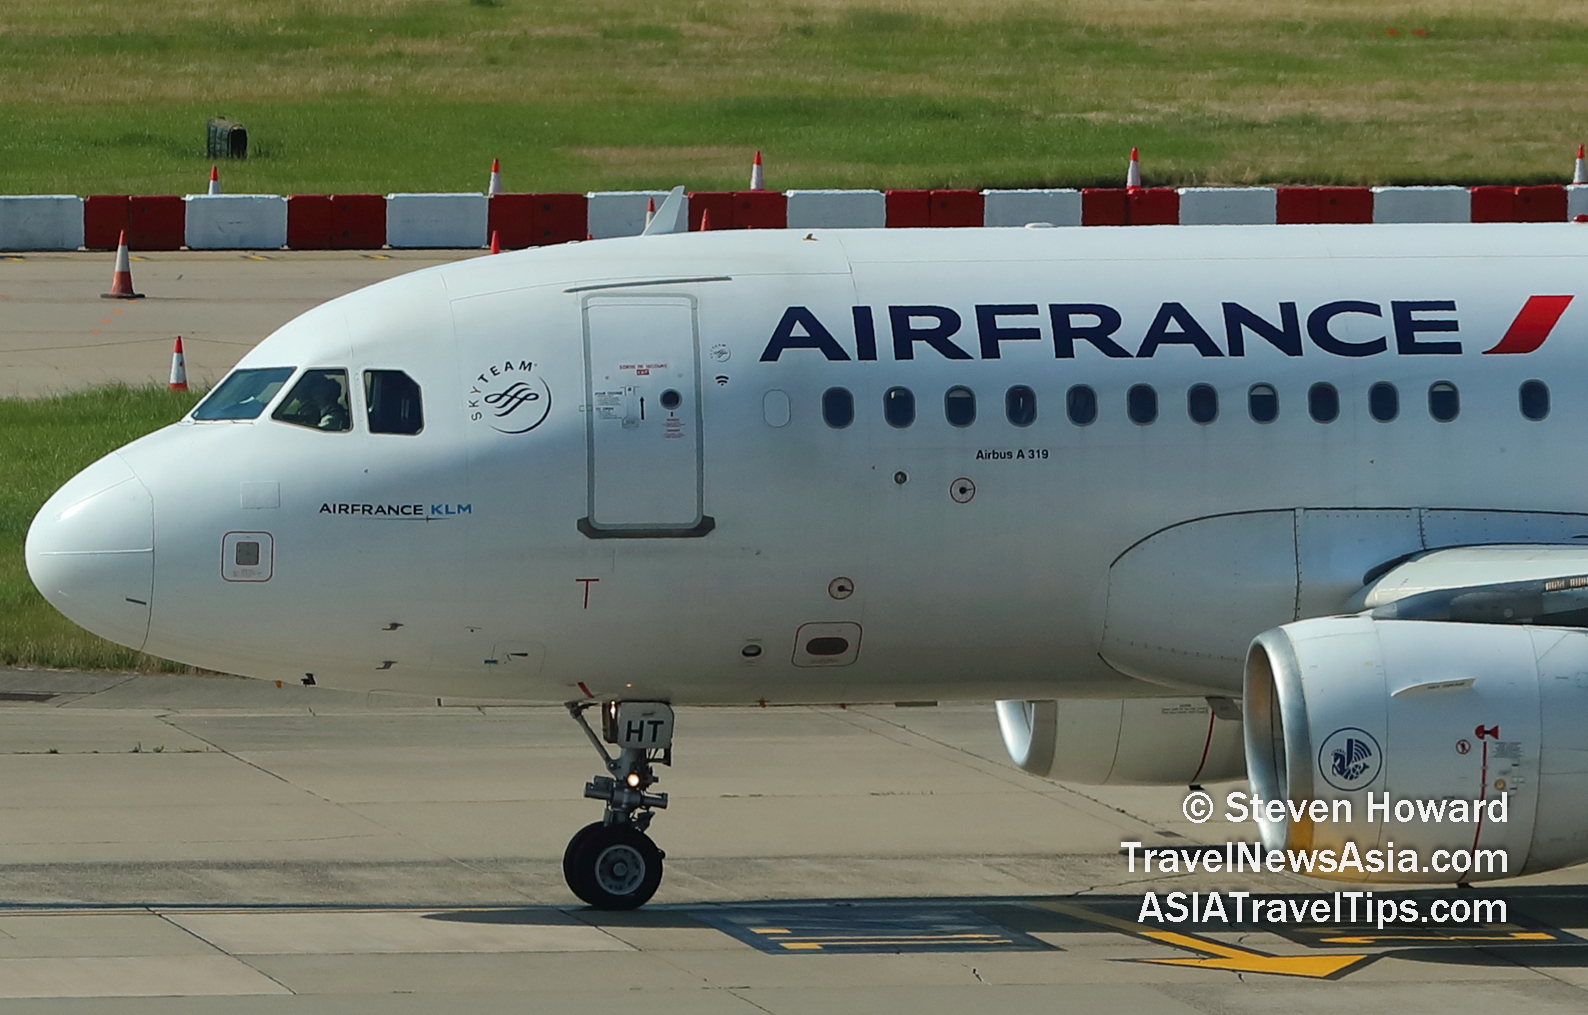 Air France A319 reg: F-GRHT. Picture by Steven Howard of TravelNewsAsia.com Click to enlarge.